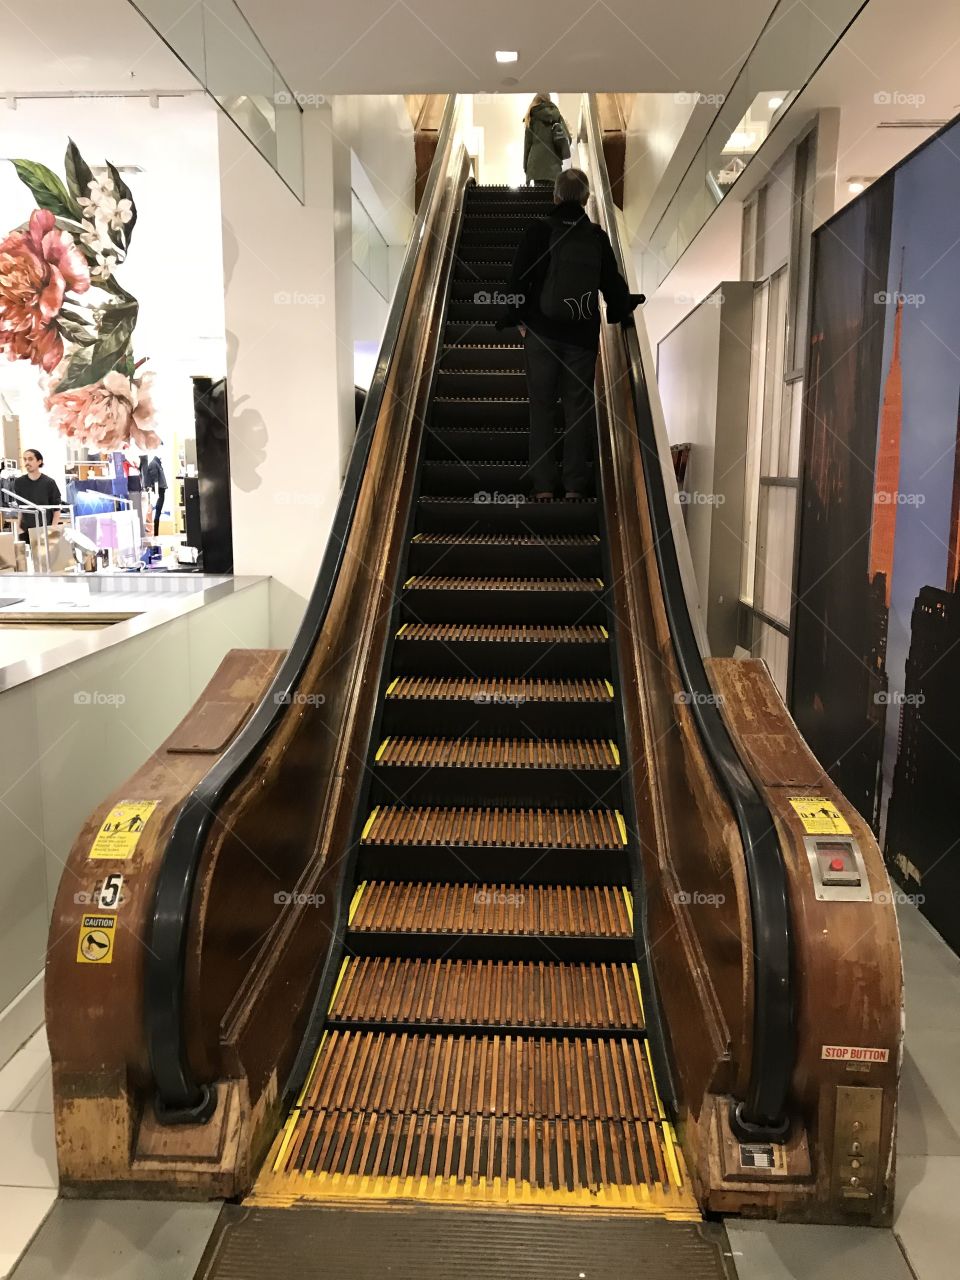 The original brass and wood escalators inside of Macy’s department store, certainly something unique I’ve never seen before!